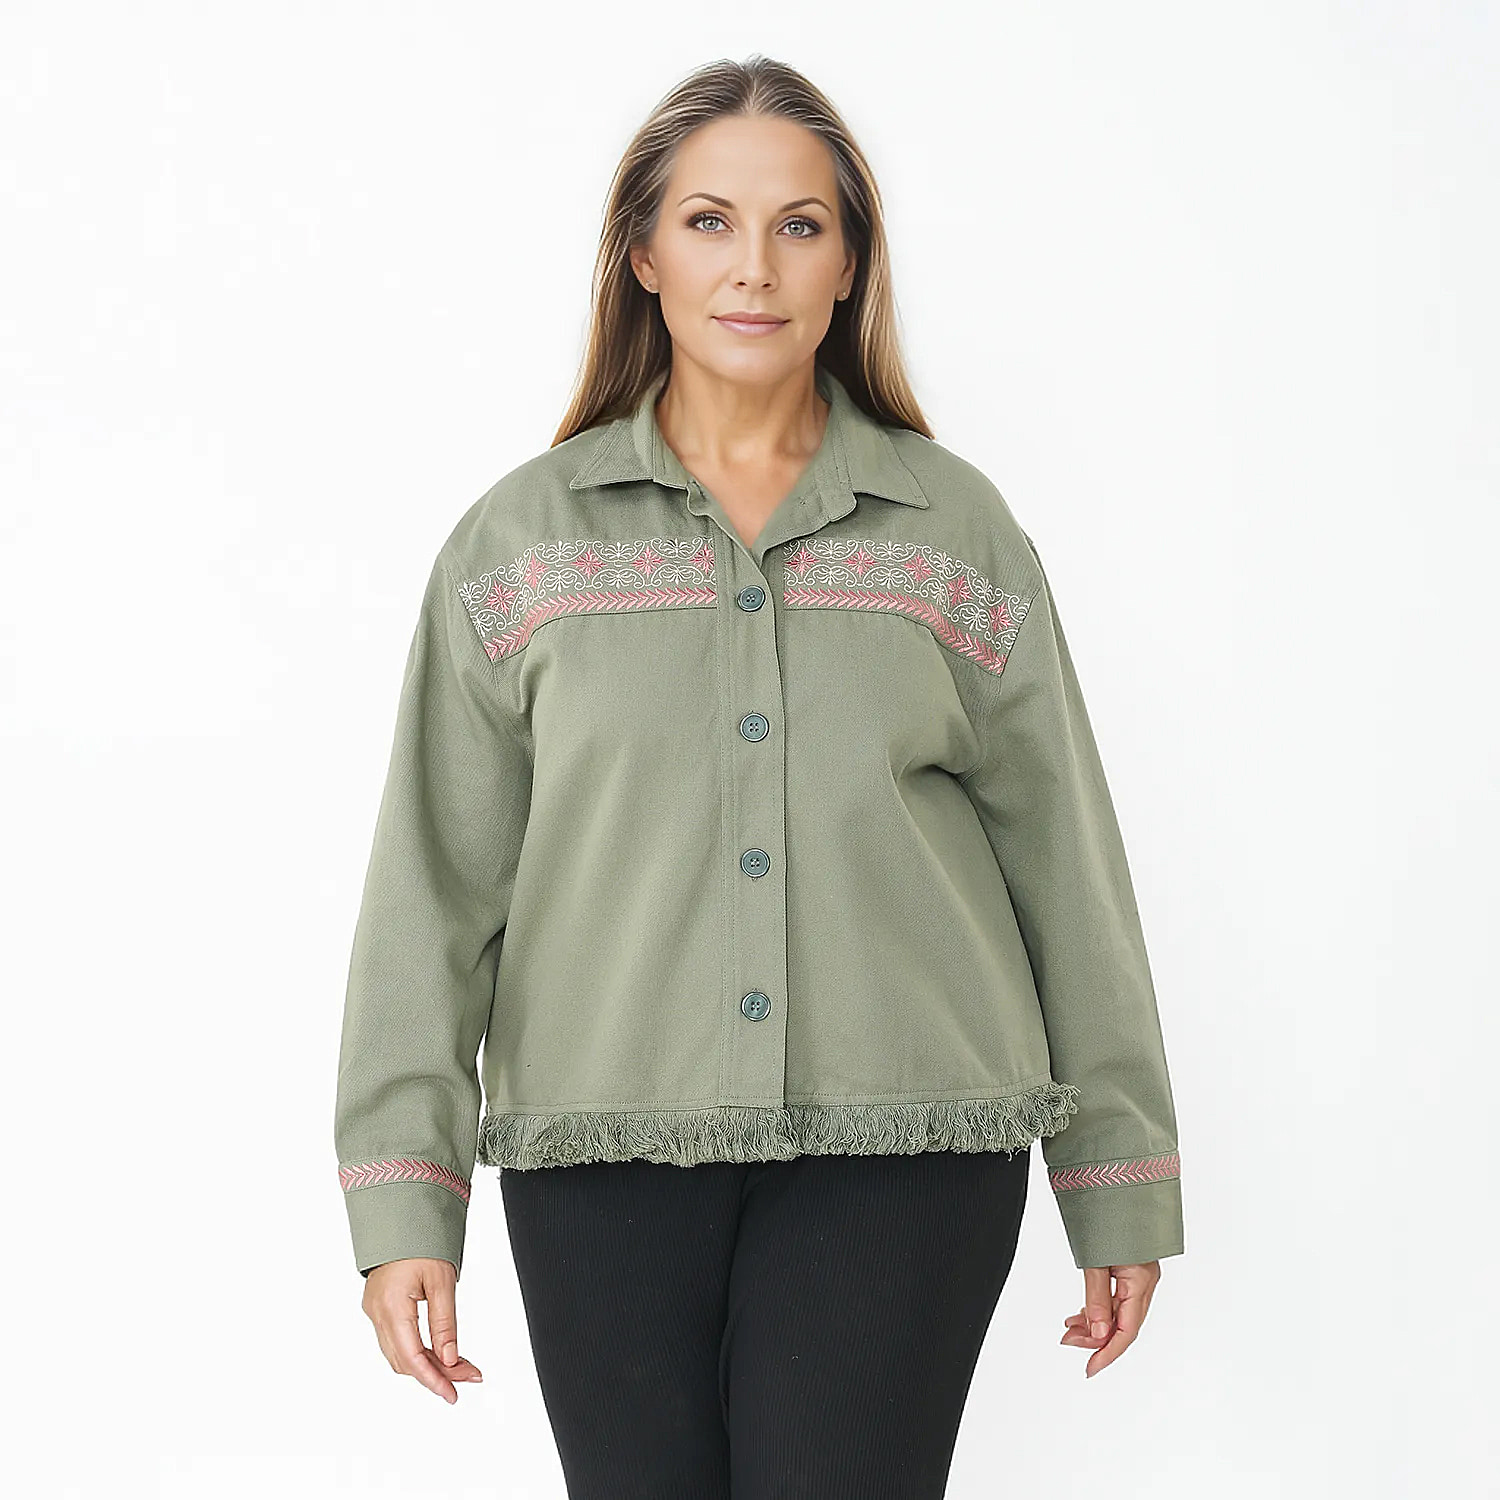 Tamsy 100% Cotton Embroidered Jacket (Size XL,20-22) - Moss Green